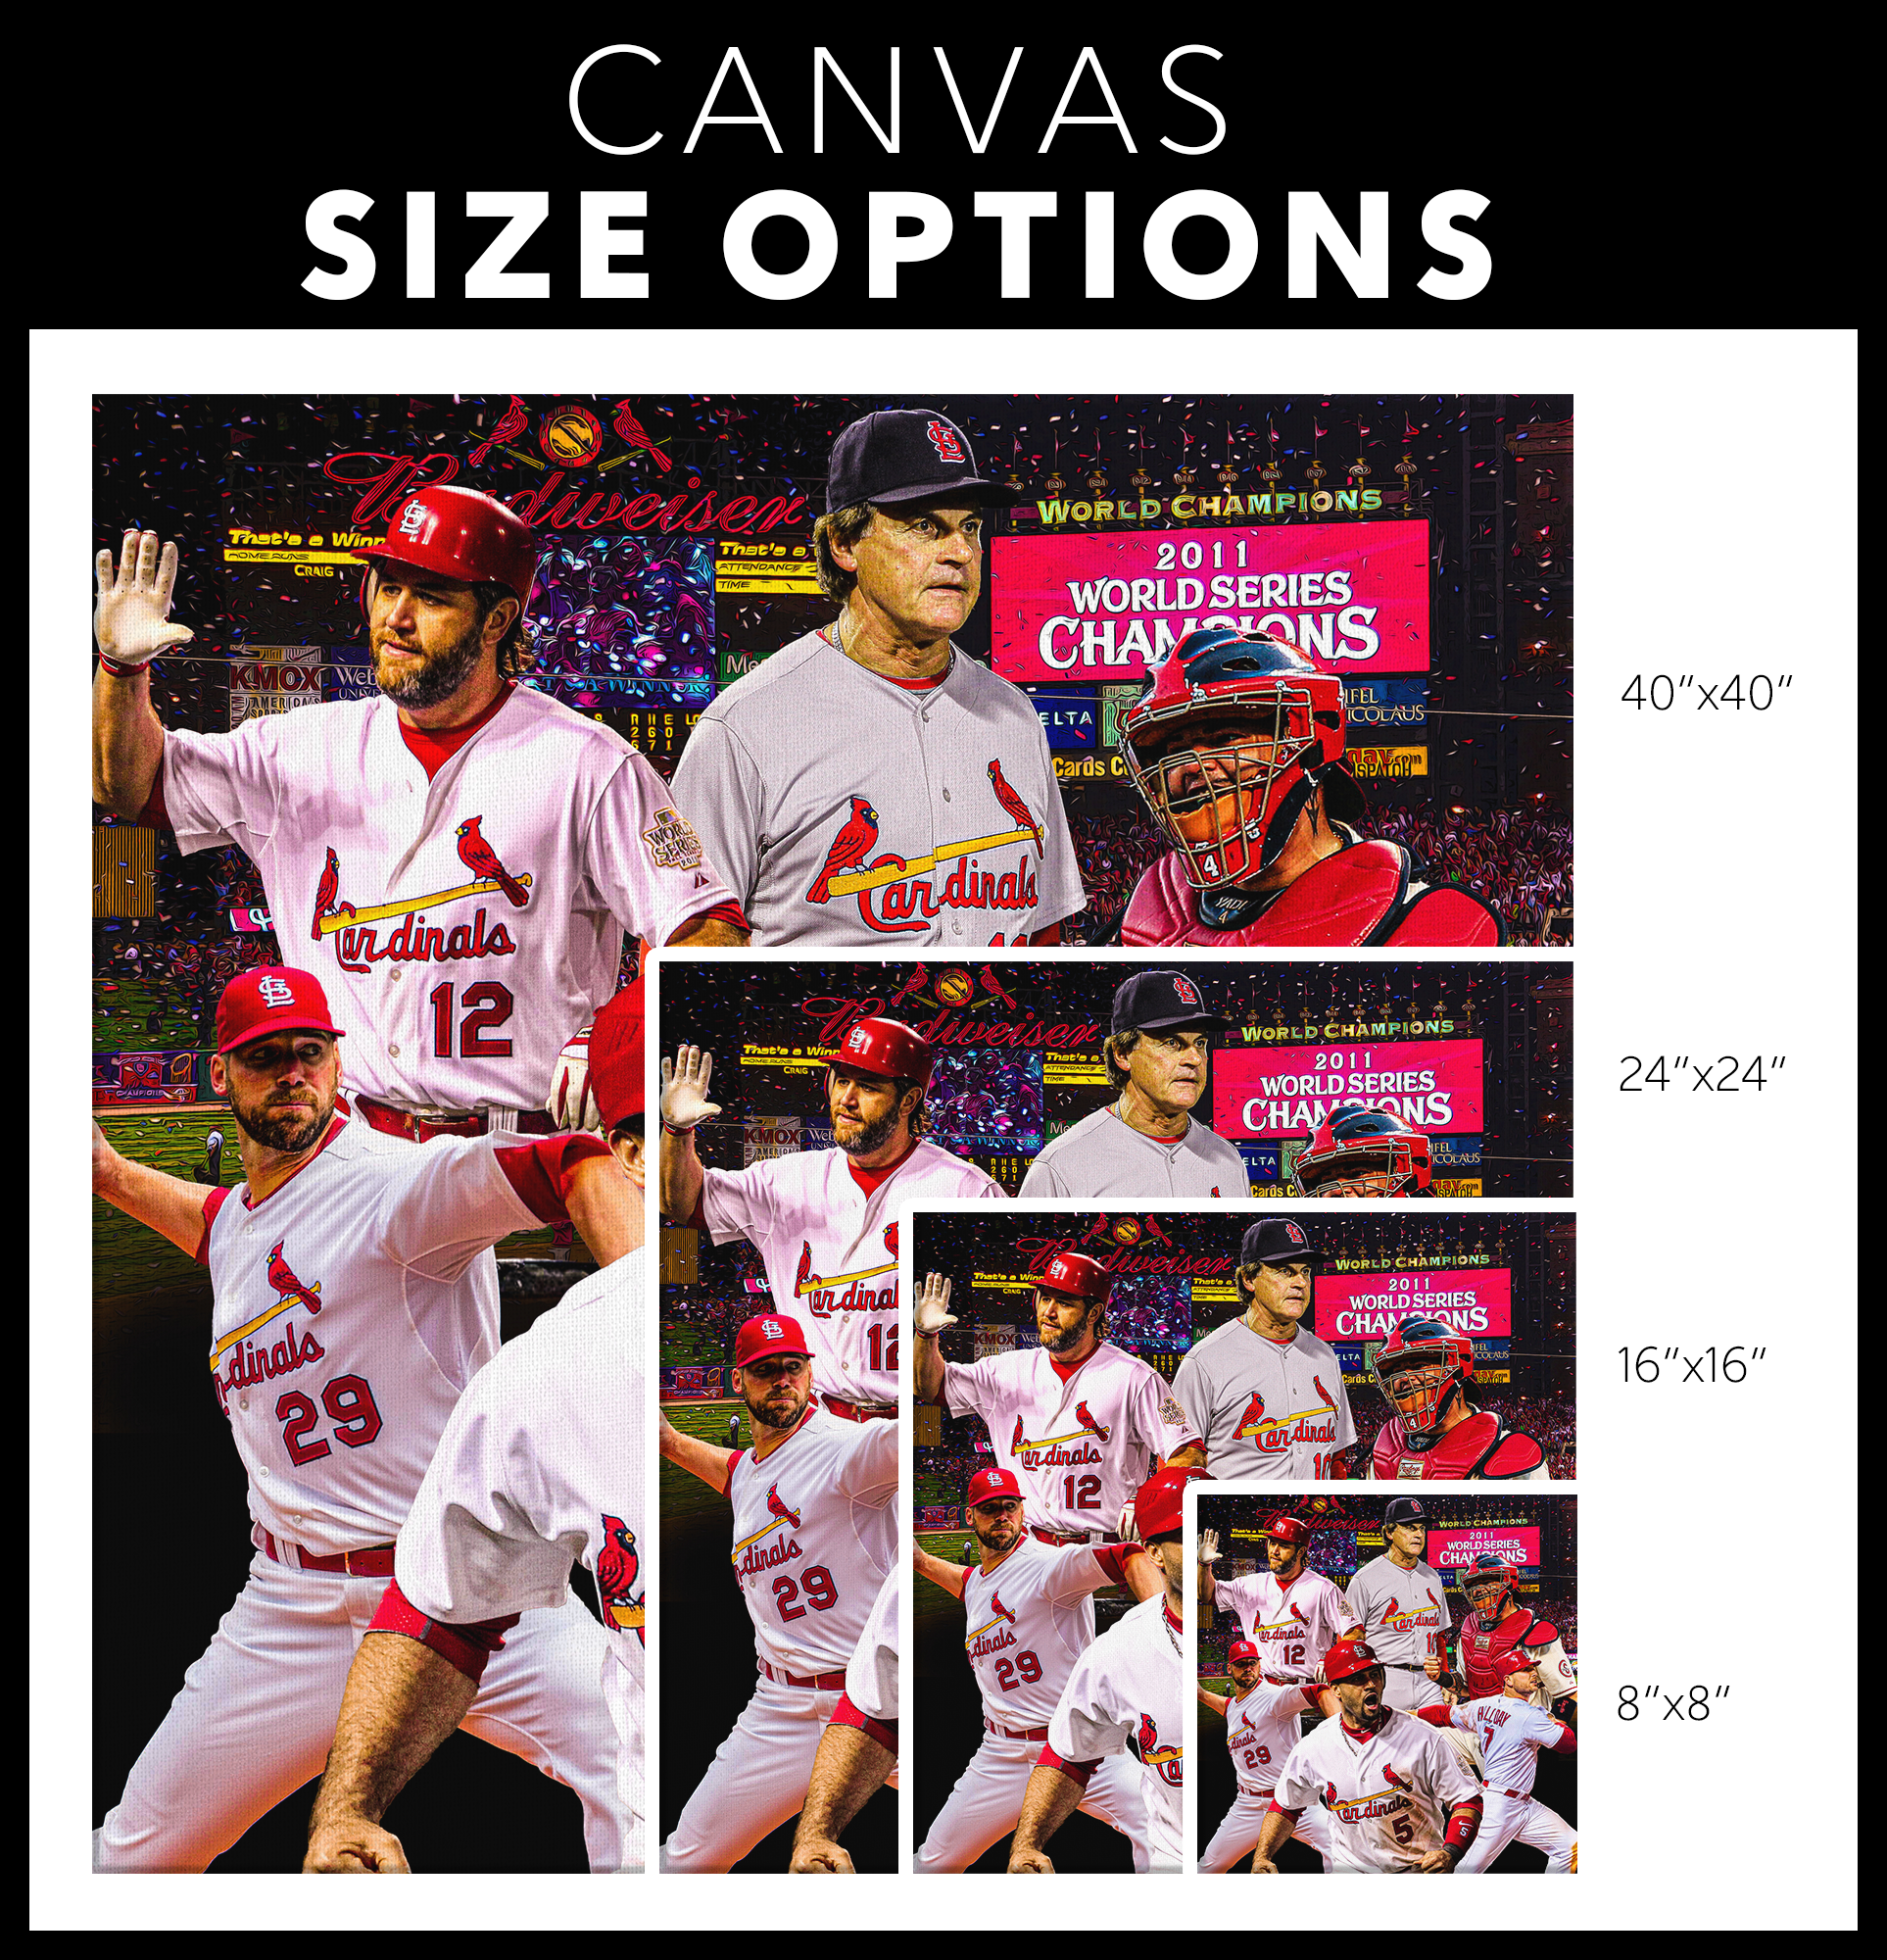 Cardinals 2011 St. Louis World Series Champions Numbered Limited Edition  8X10 Photo 